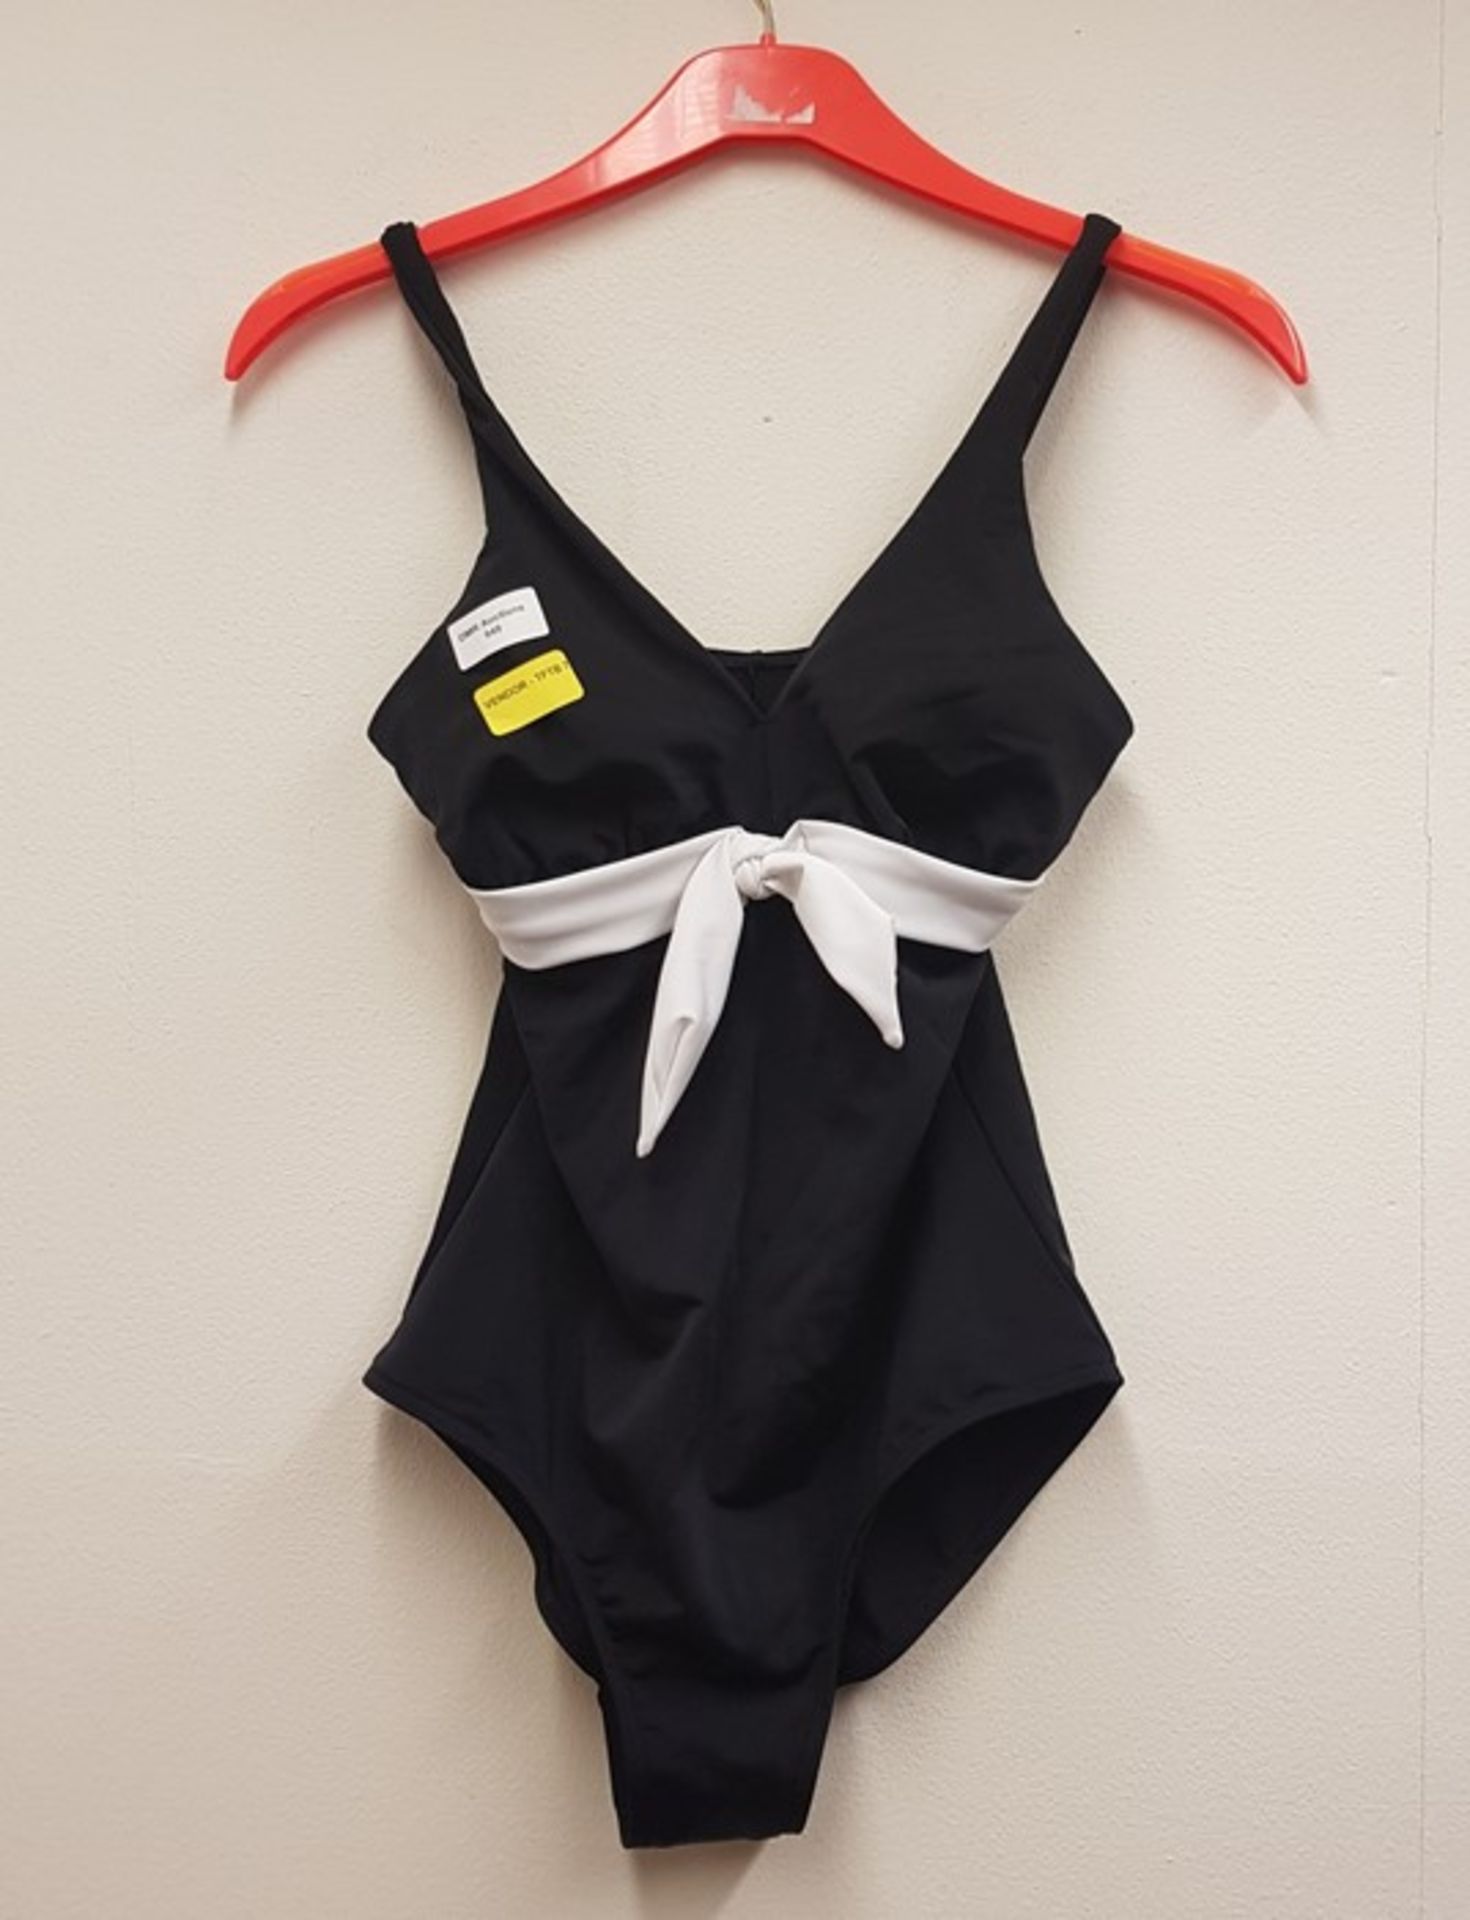 1 LA REDOUTE BLACK SWIMSUIT WITH WHITE BOW / SIZE 12 / RRP £49.99 (VIEWING HIGHLY RECOMMENDED)